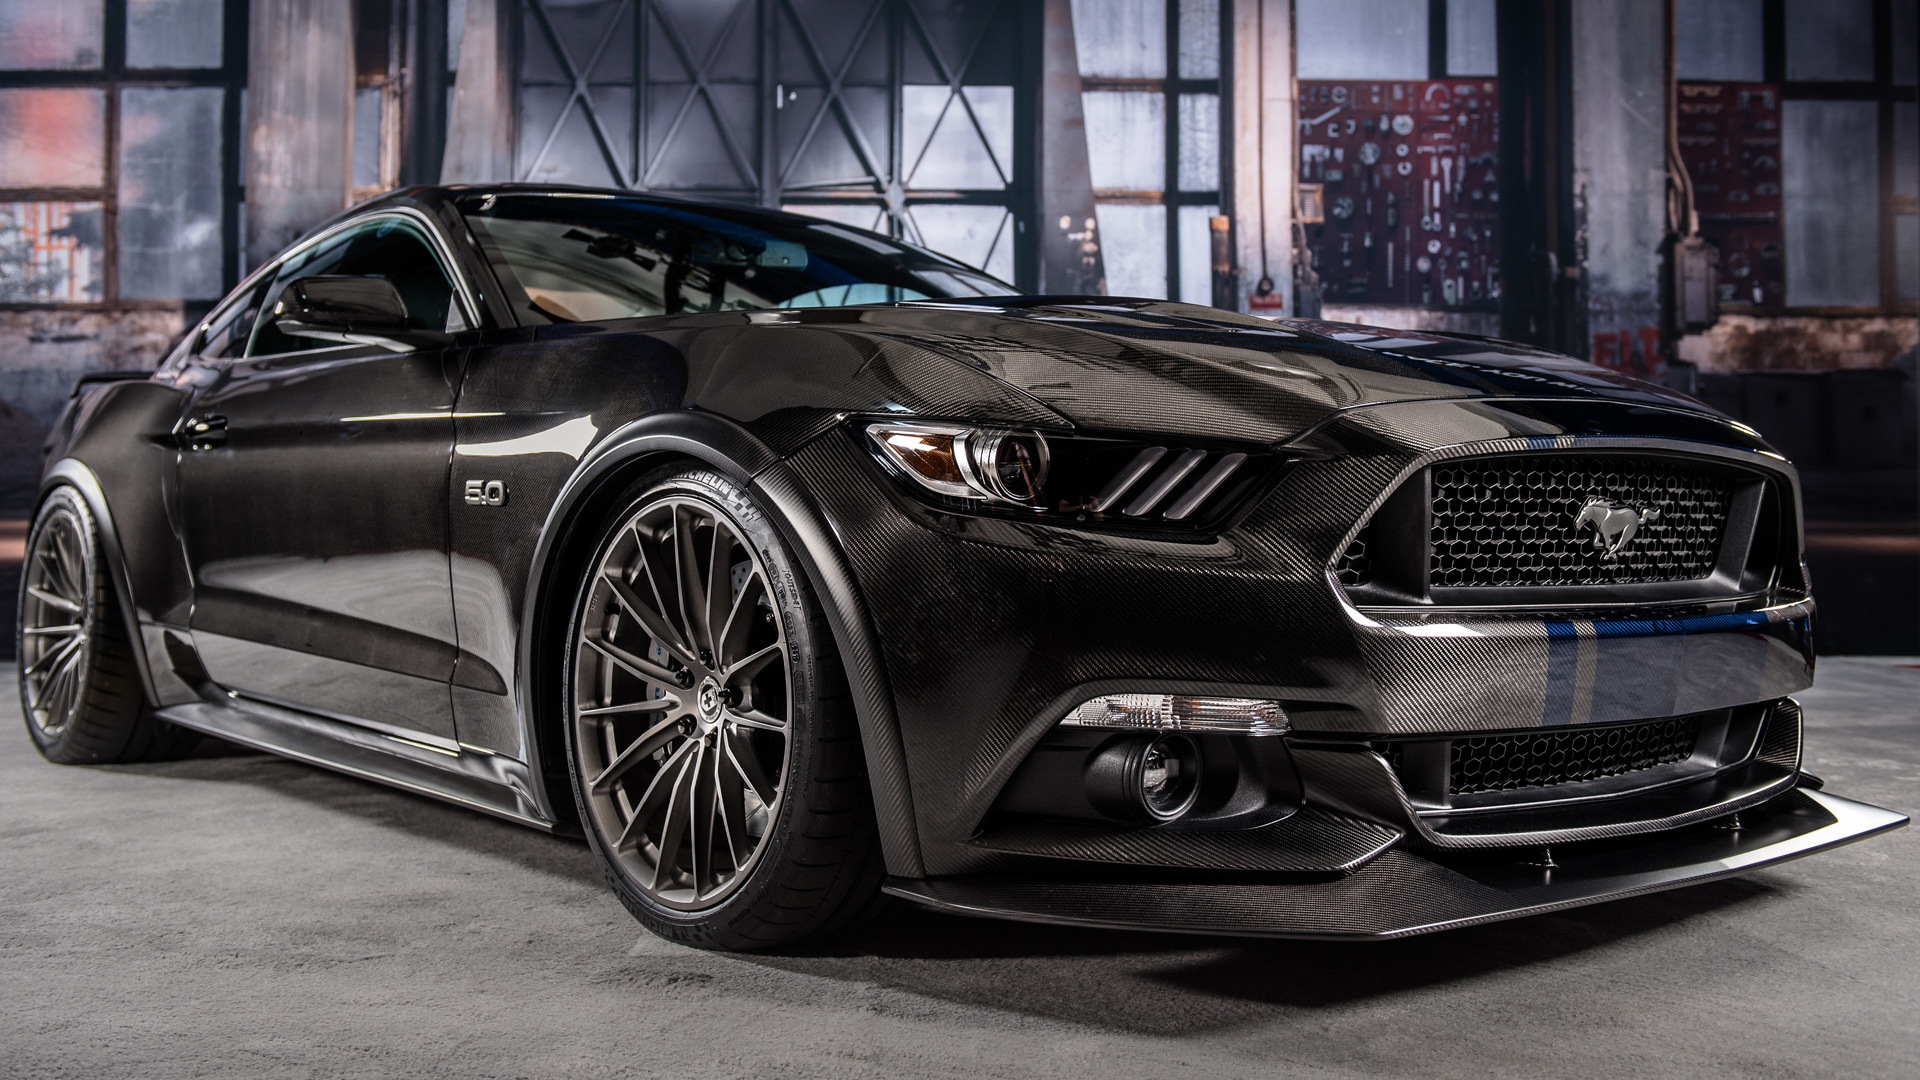 2017 Ford Mustang by Speedkore Performance Group, 2016 SEMA show